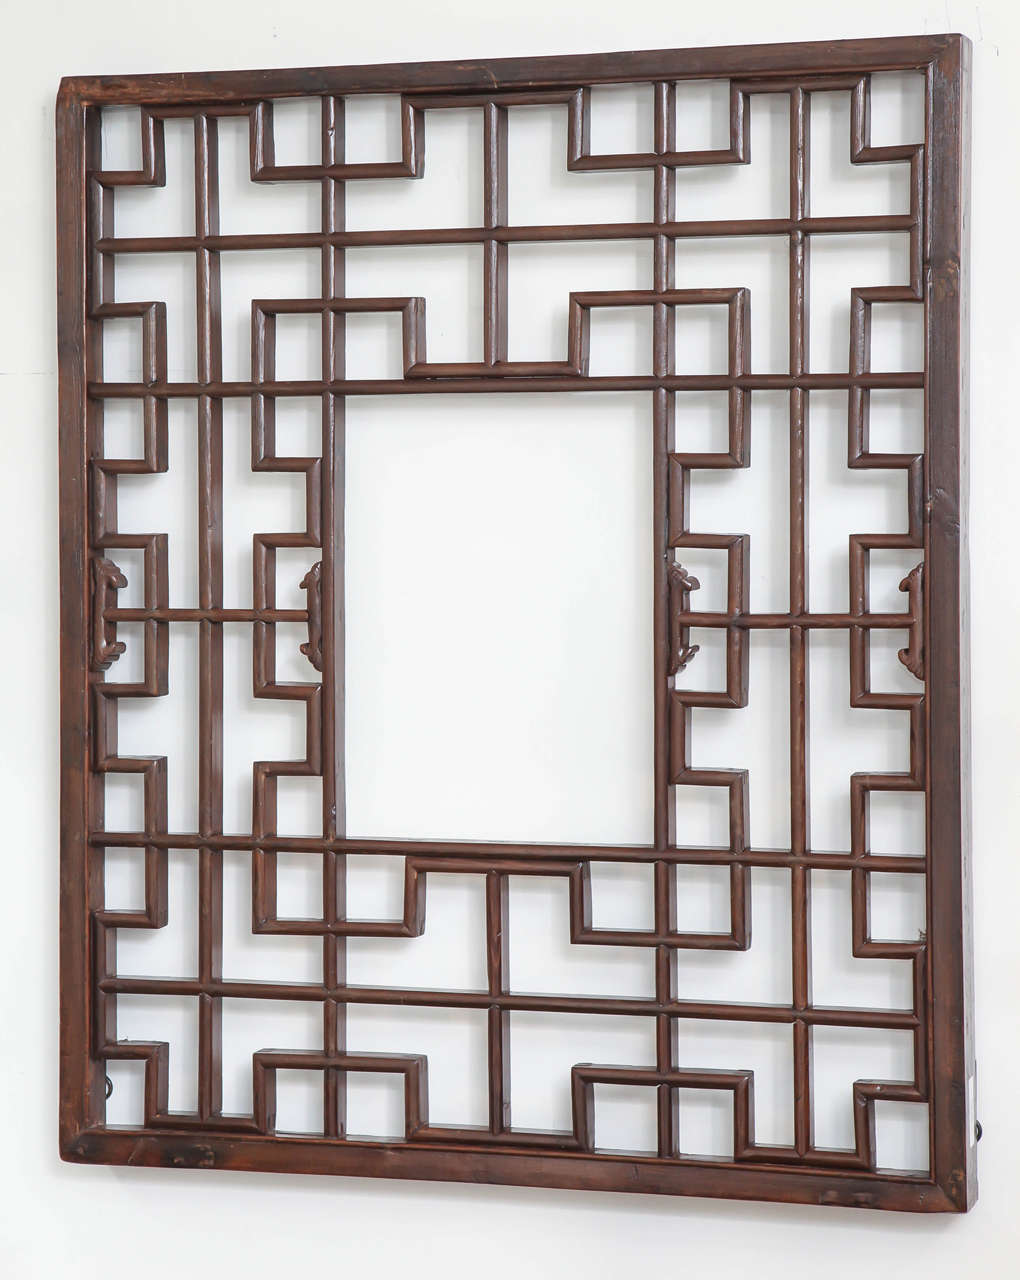 A lattice screen panel with carved details and rectangular opening, from Shanxi, China, late 19th century. Suitable for mirror backing.